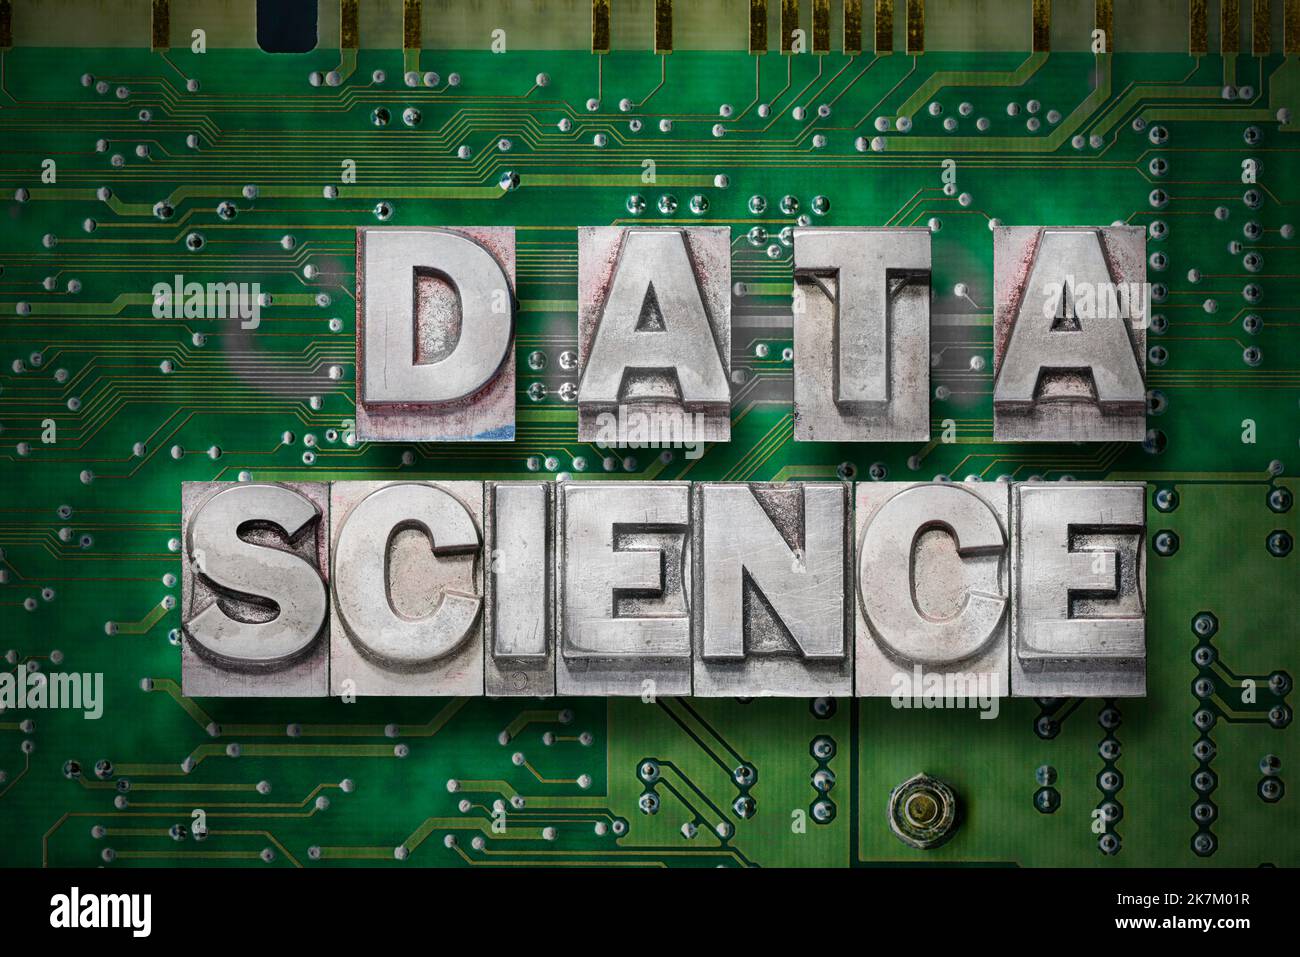 data science phrase made from metallic letterpress blocks on the pc board background Stock Photo